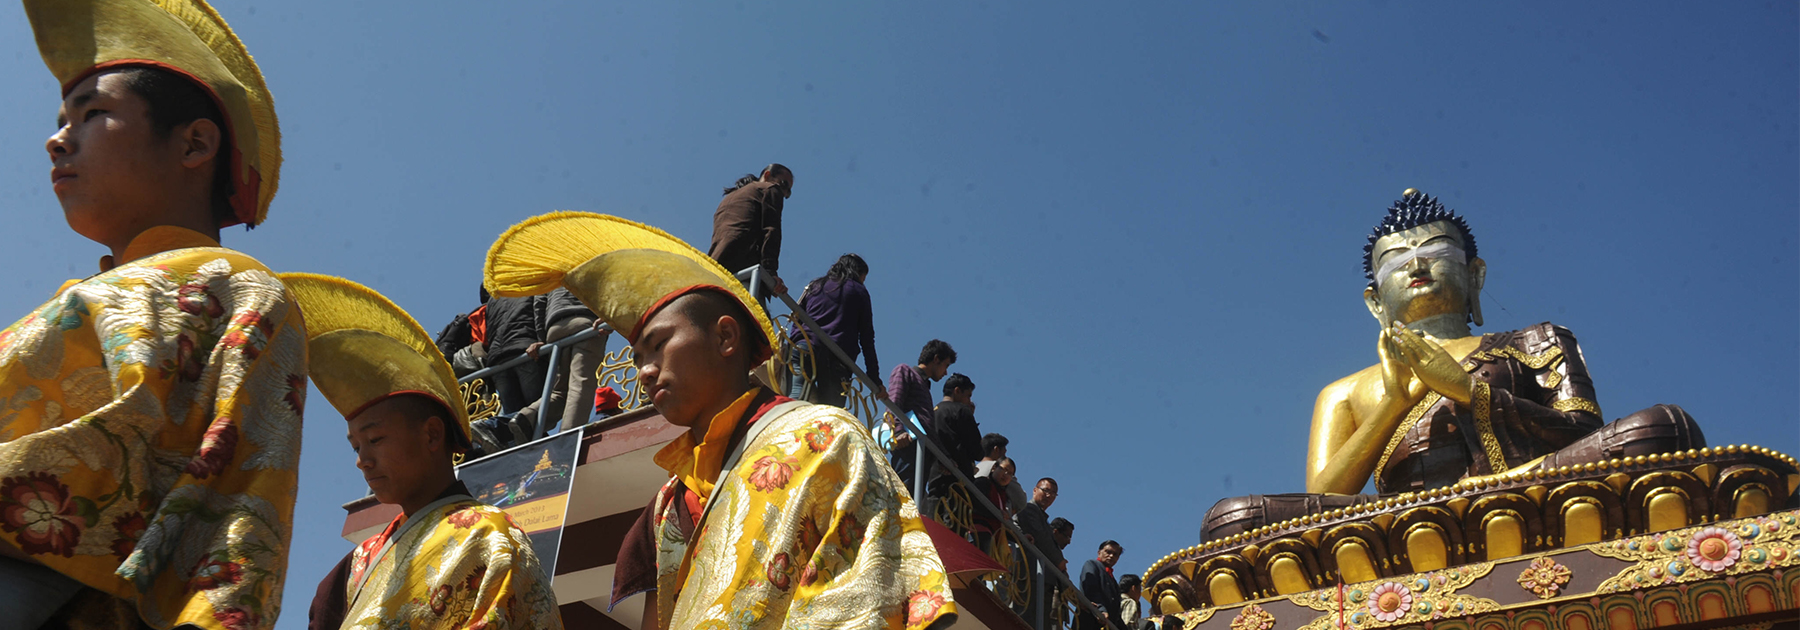 Buddhist monks walk at the 130 foot Lord Buddha statue during the Dzung ceremony as Buddha Park is unveiled on February 25, 2013. (DIPTENDU DUTTA/AFP/Getty Images)